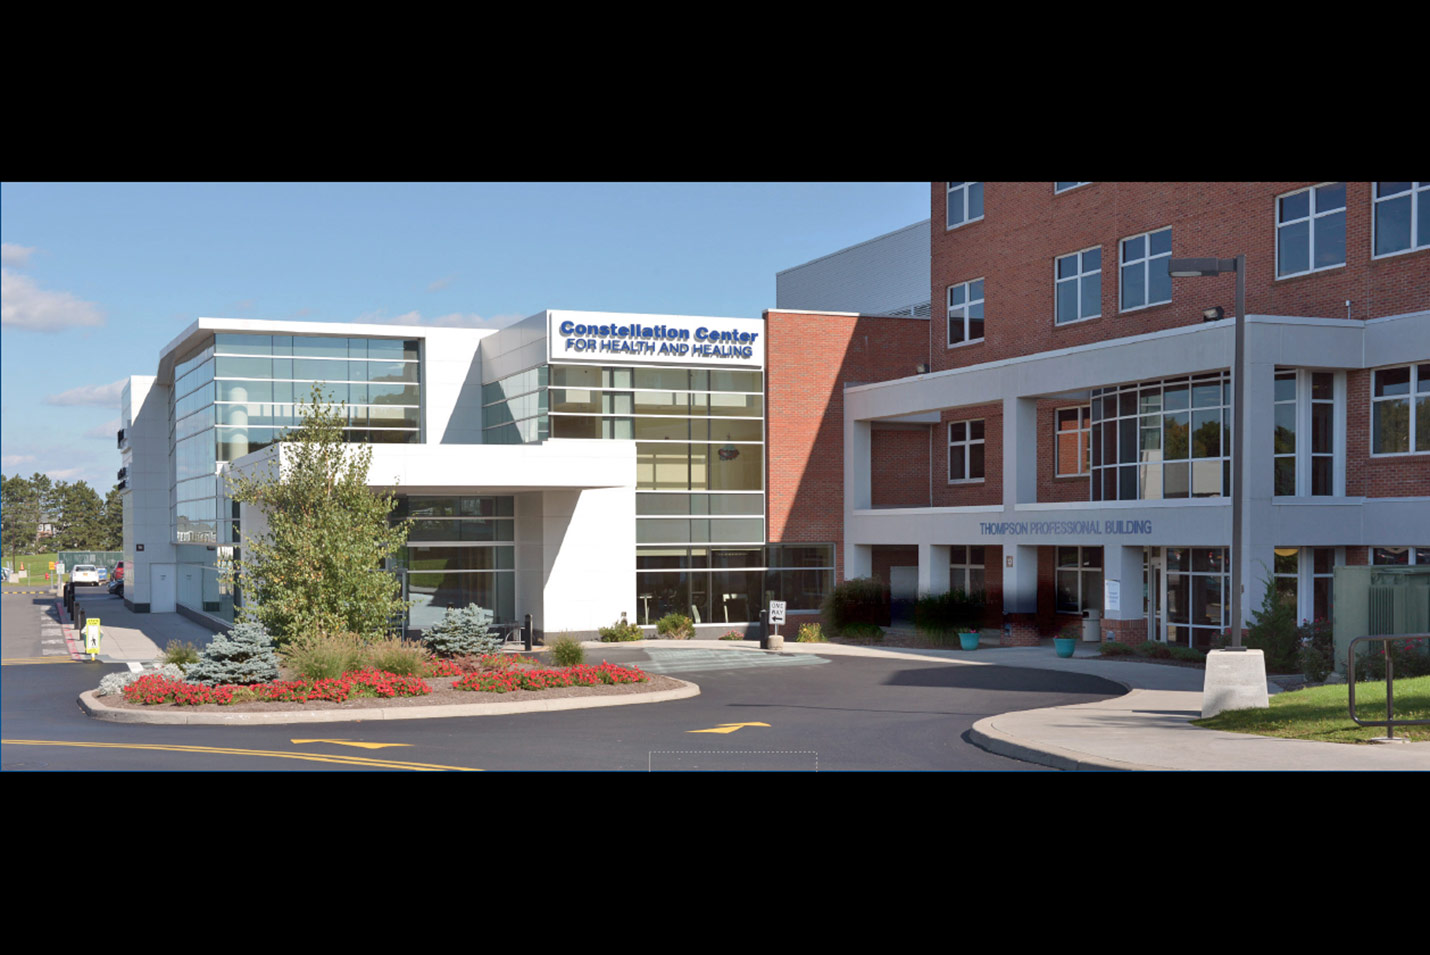 Thompson Professional Building and Constellation Center for Health and Healing Front Entrances